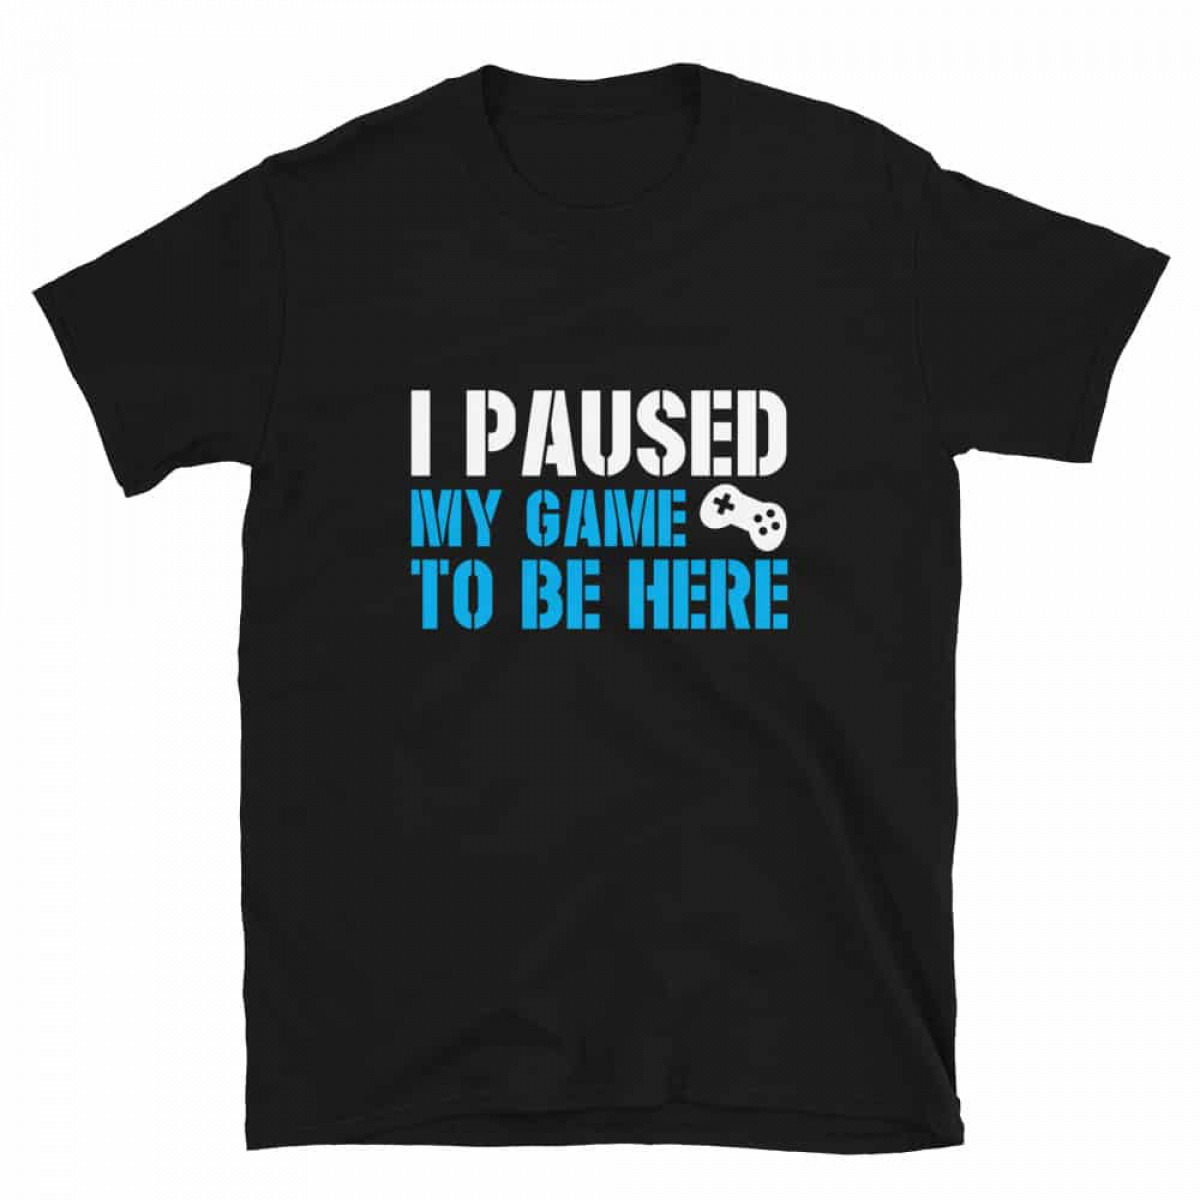 Shop Loudpig I Paused my Game to be here t-shirt anime 3